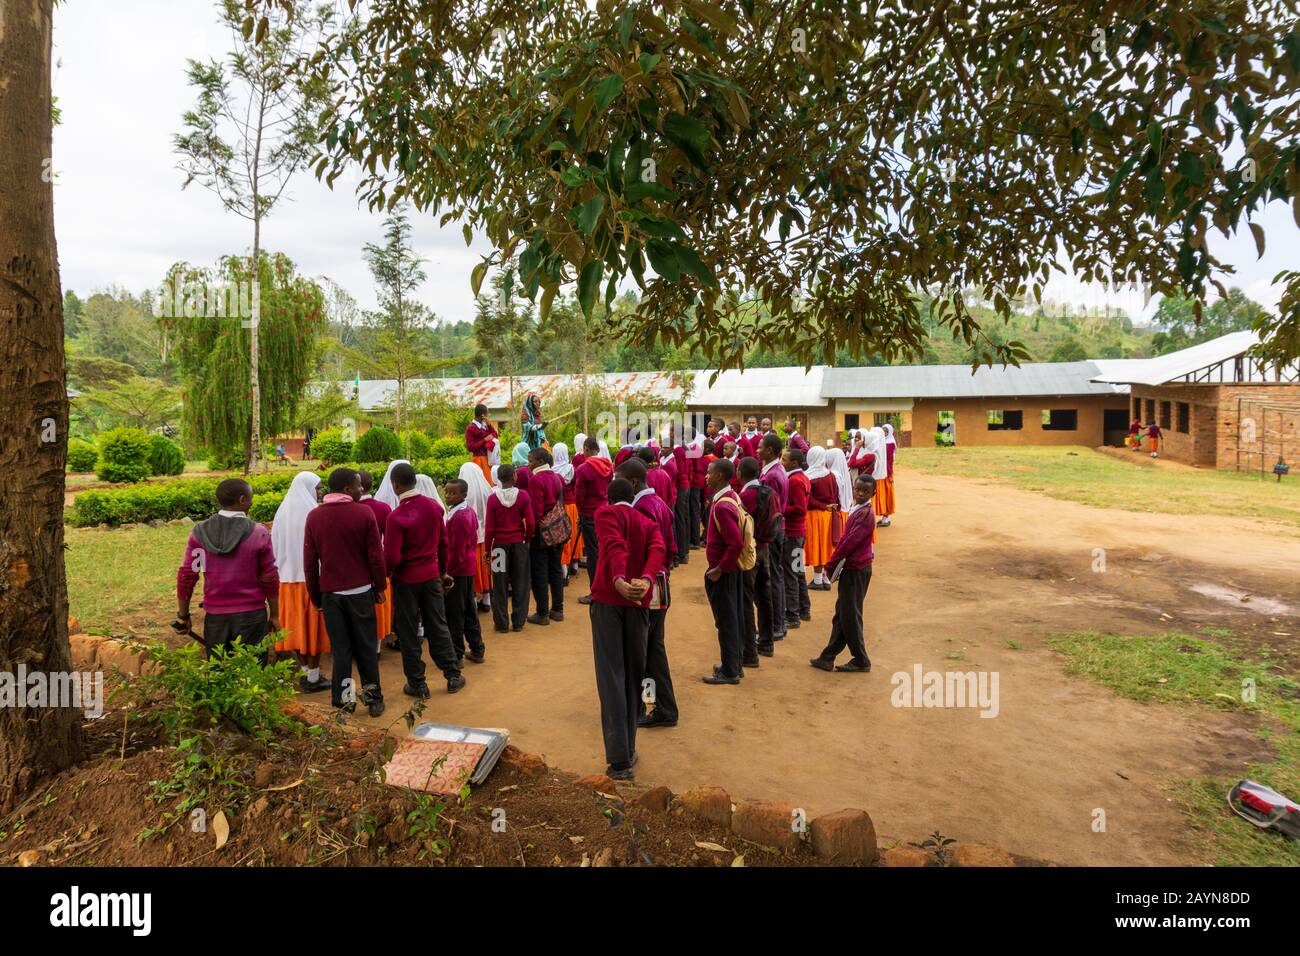 LUSHOTO, TANGA REGION, TANZANIA - AUGUST 22, 2019: in the forecourt of a high school students are listening to the speech of director of the school Stock Photo